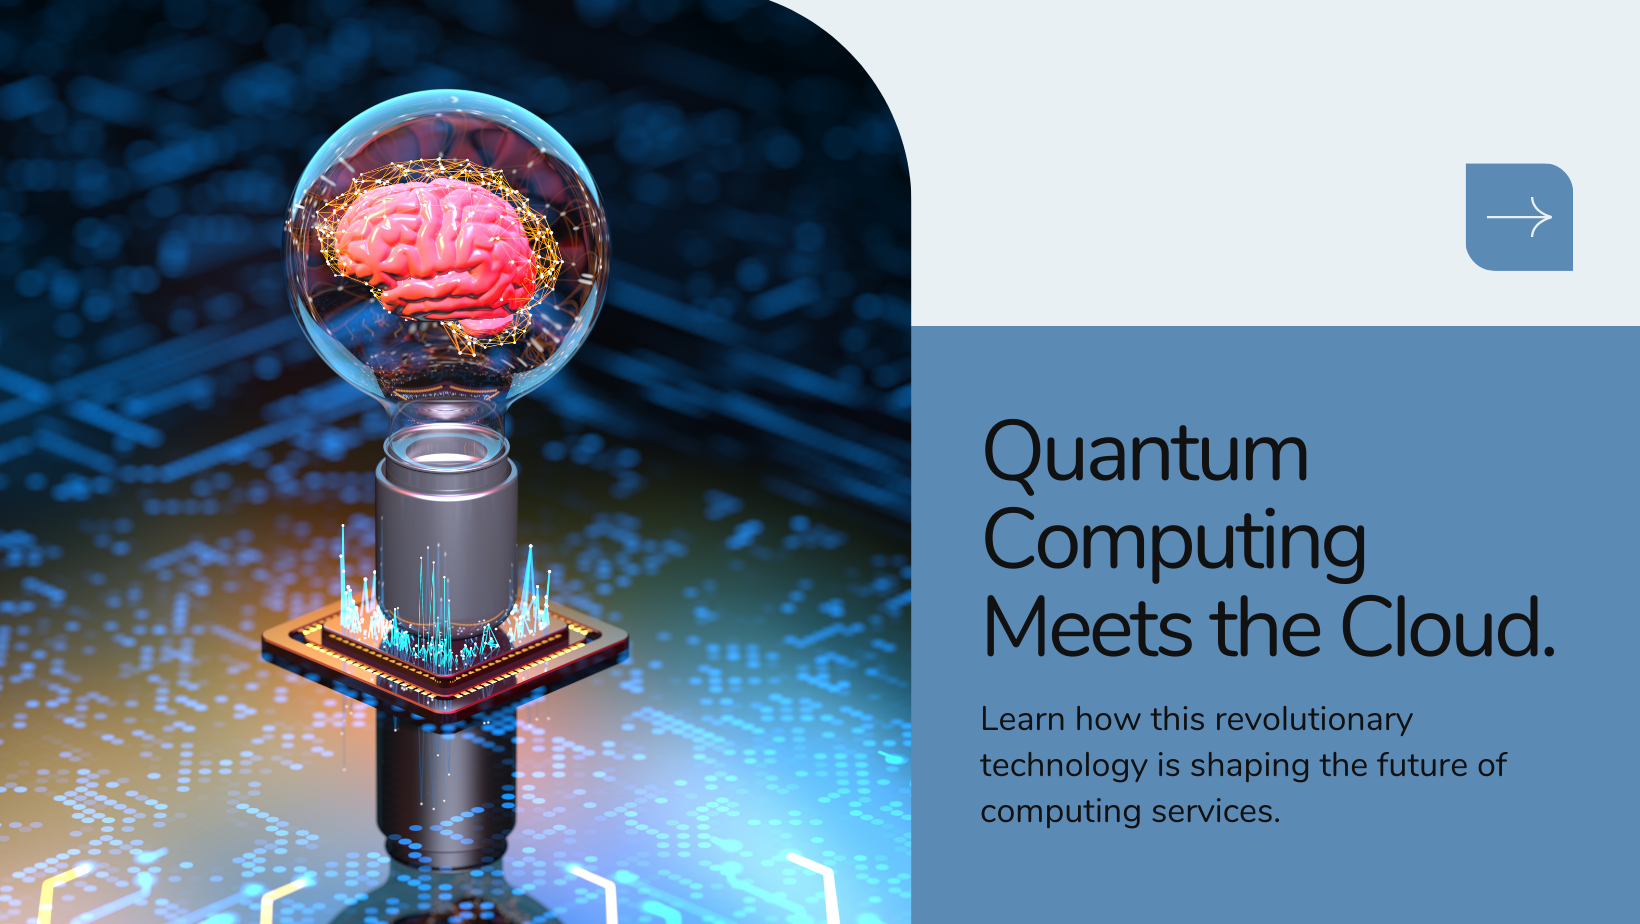 Quantum Computing Meets the Cloud: Shaping the Future of Computing Services